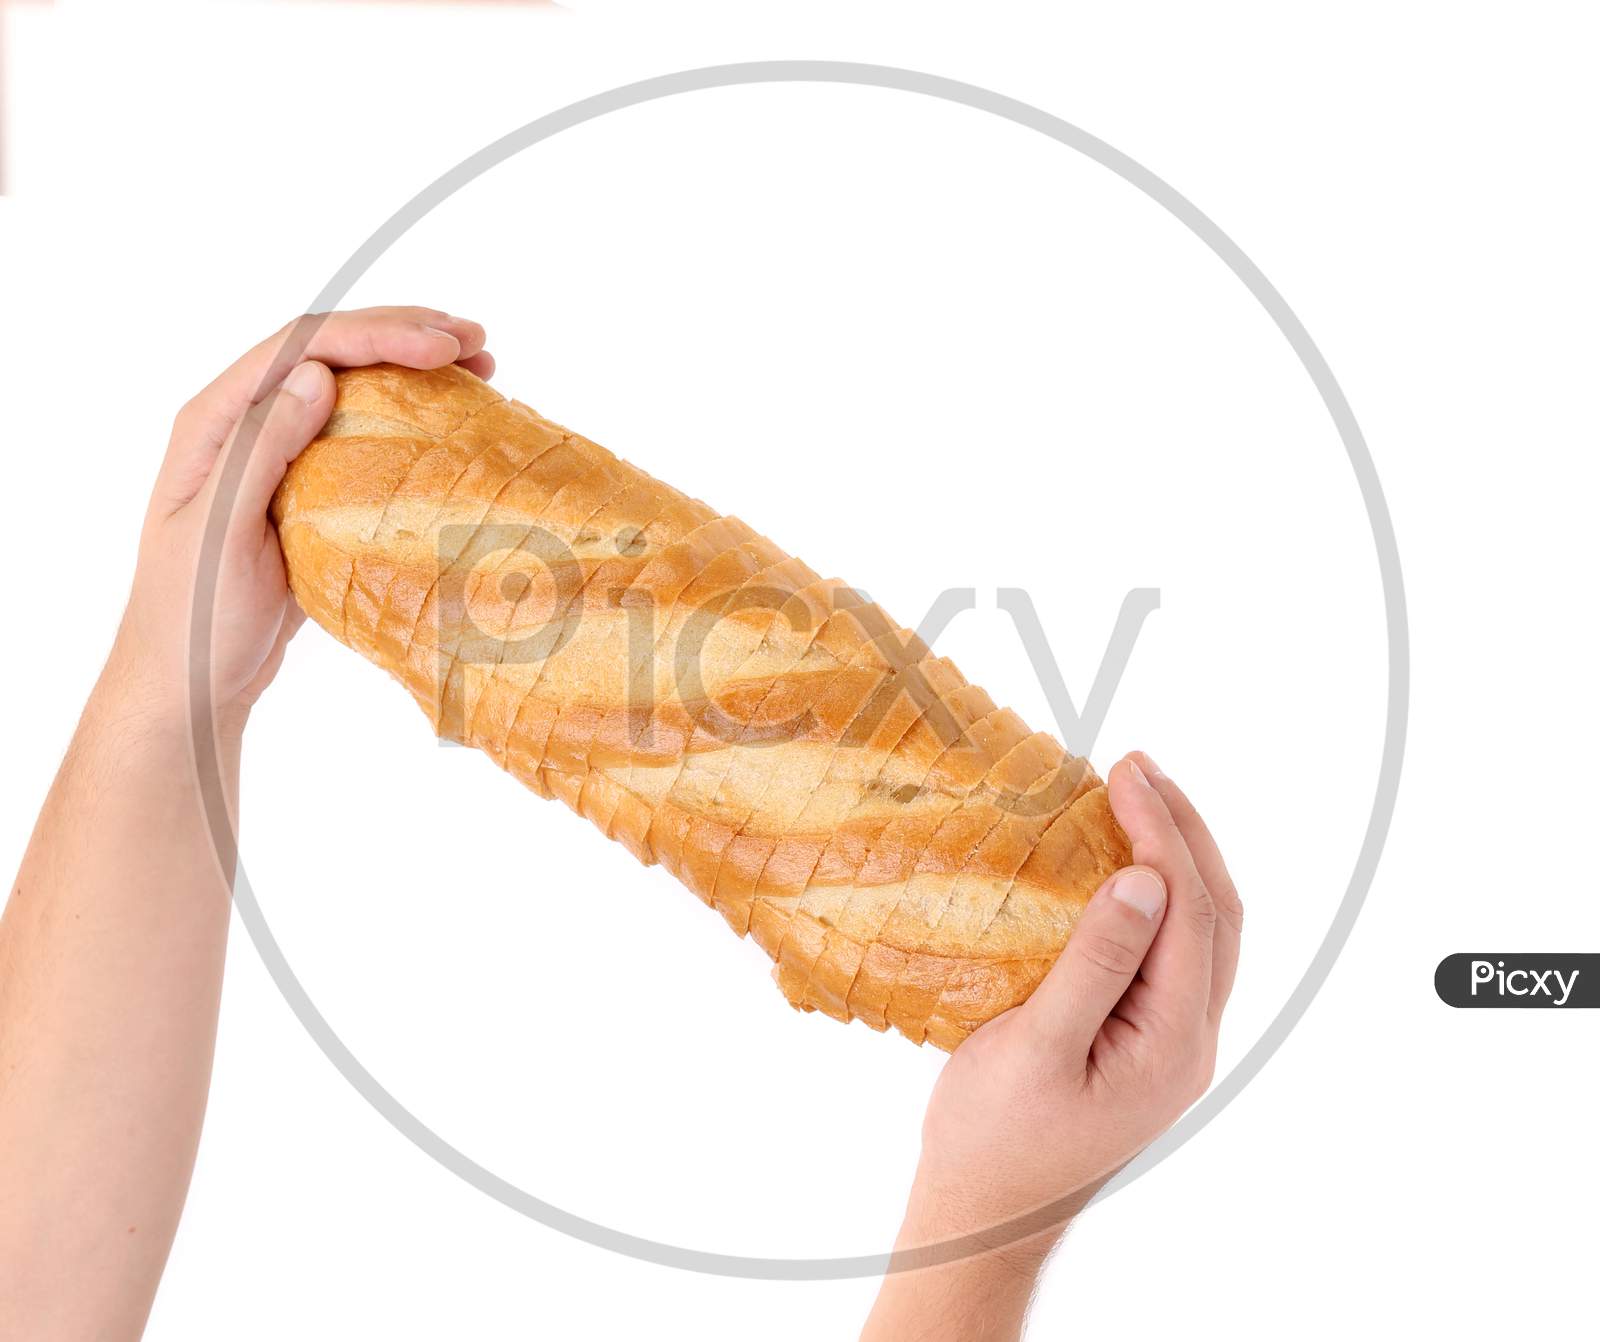 Sliced White Bread On A Hand. Isolated On A White Background.